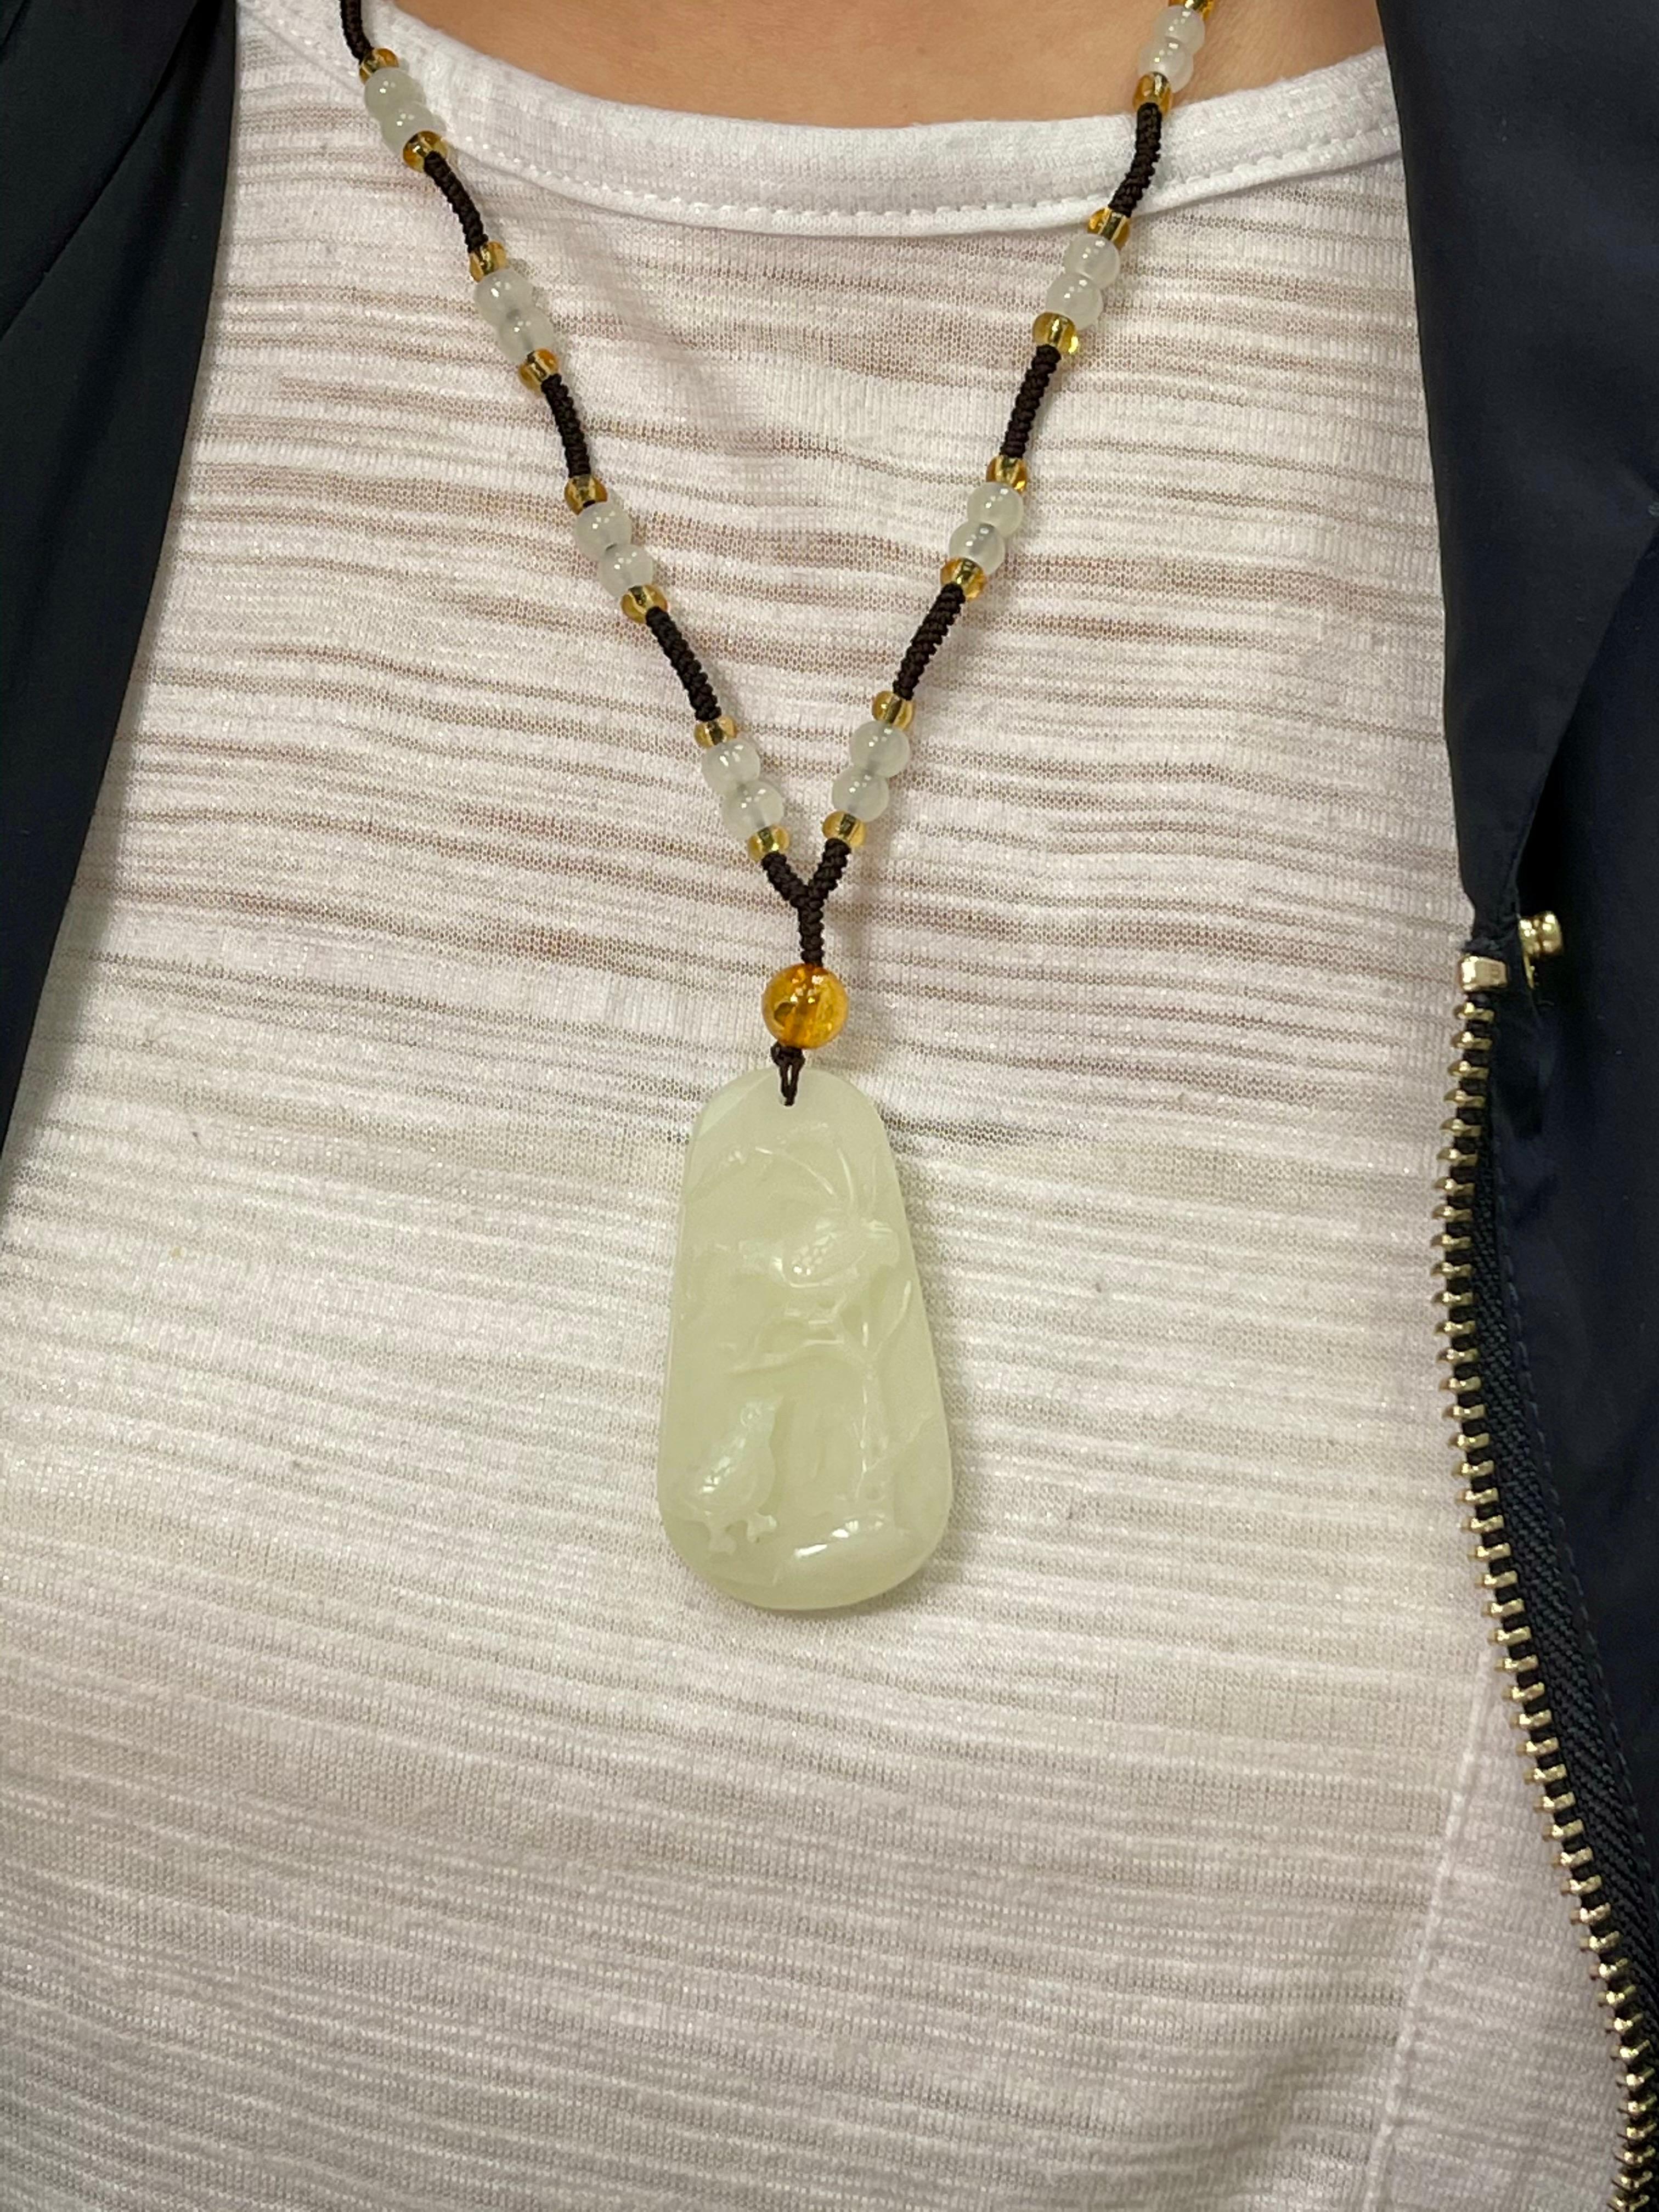 For your consideration is a certified natural nephrite jade necklace. This jade is very well carved. The jade carving is of scenic nature of birds and trees. The Hetian nephrite jade carving is close to being white. The photo (#3) that best